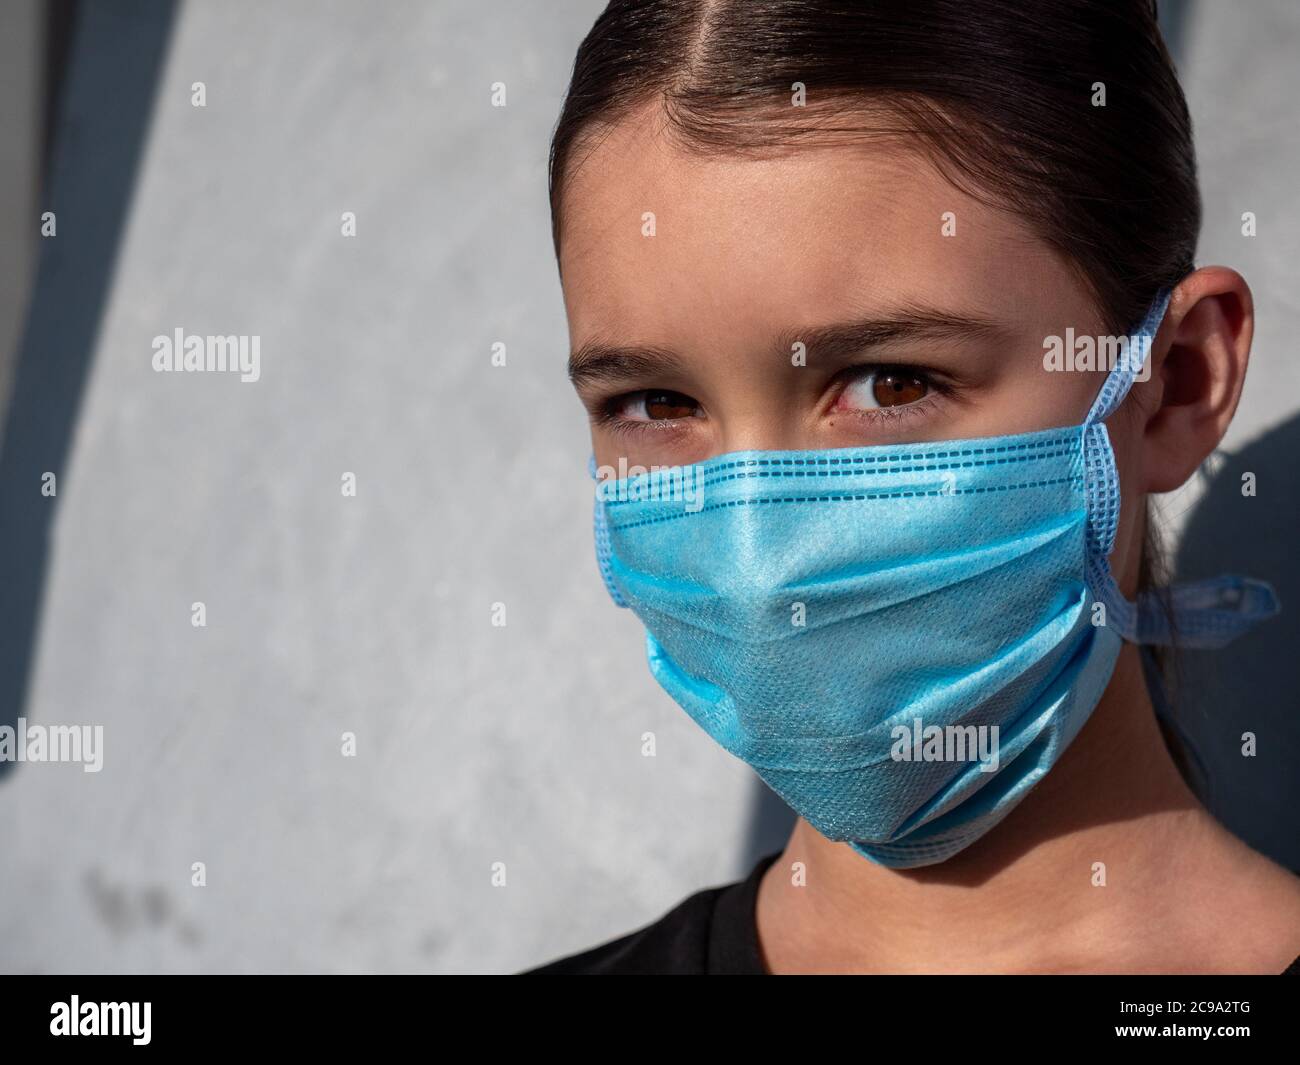 Female teenage girl wearing a blue protective medical face mask. Hazel eyes and brown hair. Antiviral protection during corona virus pandemia concept. Stock Photo